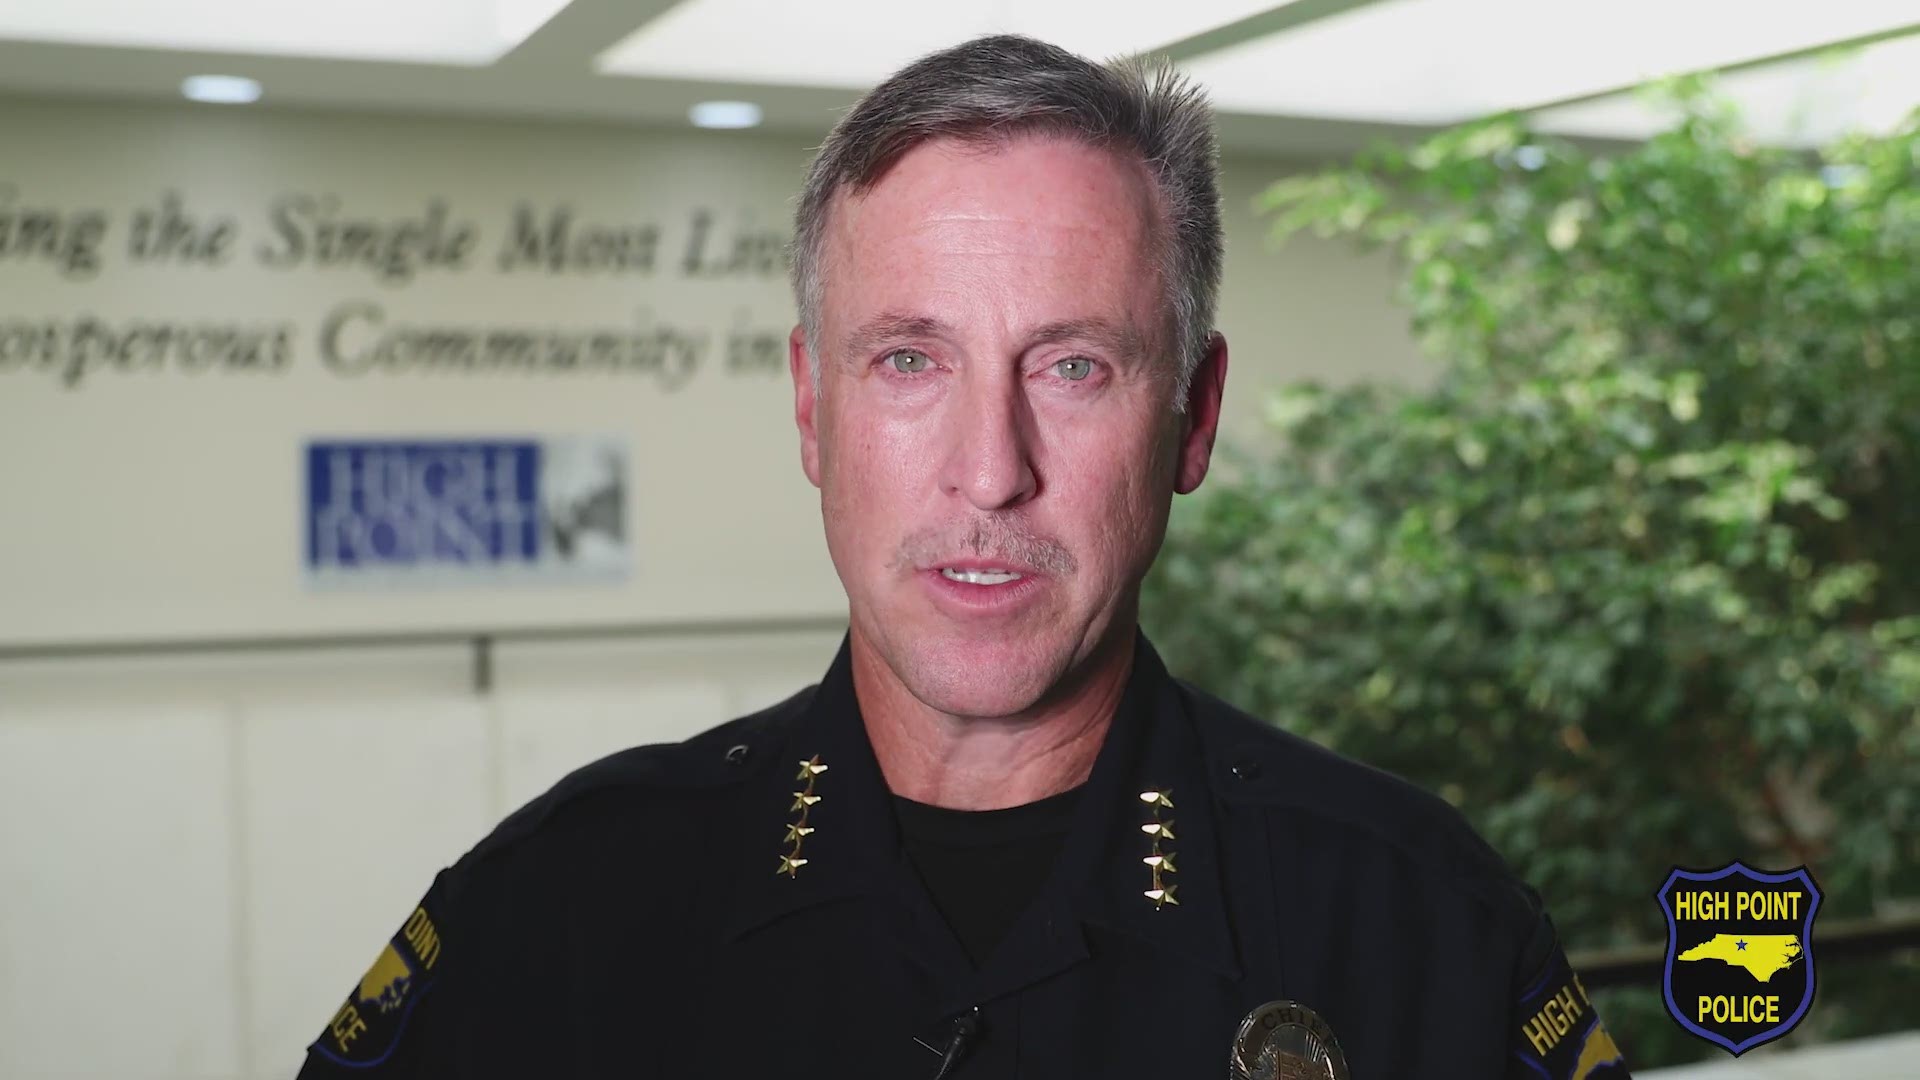 High Point Police chief Ken Shultz made a video thanking the students who called and reported it after seeing a student on campus with guns. That call foiled a major plan for a mass shooting. Investigators say a freshman at High Point University decided to start his school year with a mass shooting on his mind. 19-year-old Paul Steber was arrested and charged Tuesday with plotting to shoot up the university, police say. At the time of his arrest, school was only seven days in.